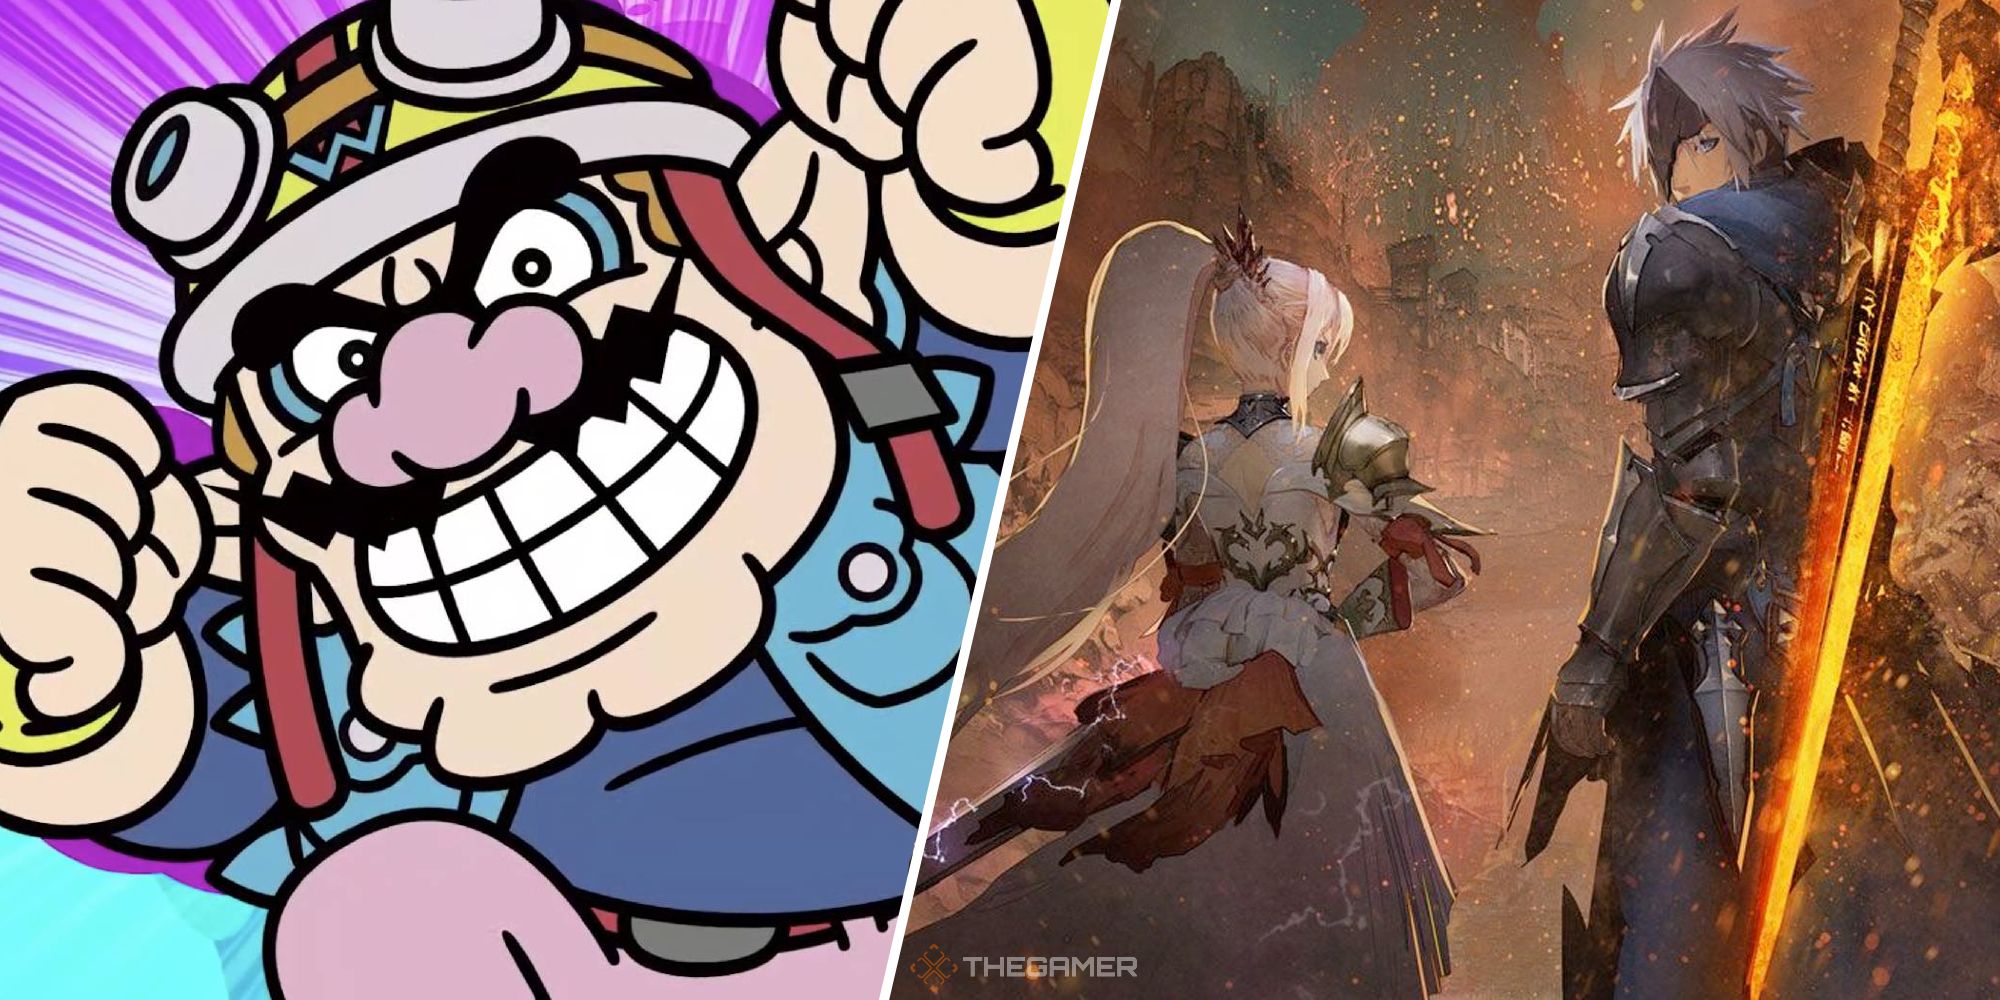 Wario on the left, Shionne and Alphen from Tales of Arise on the right.